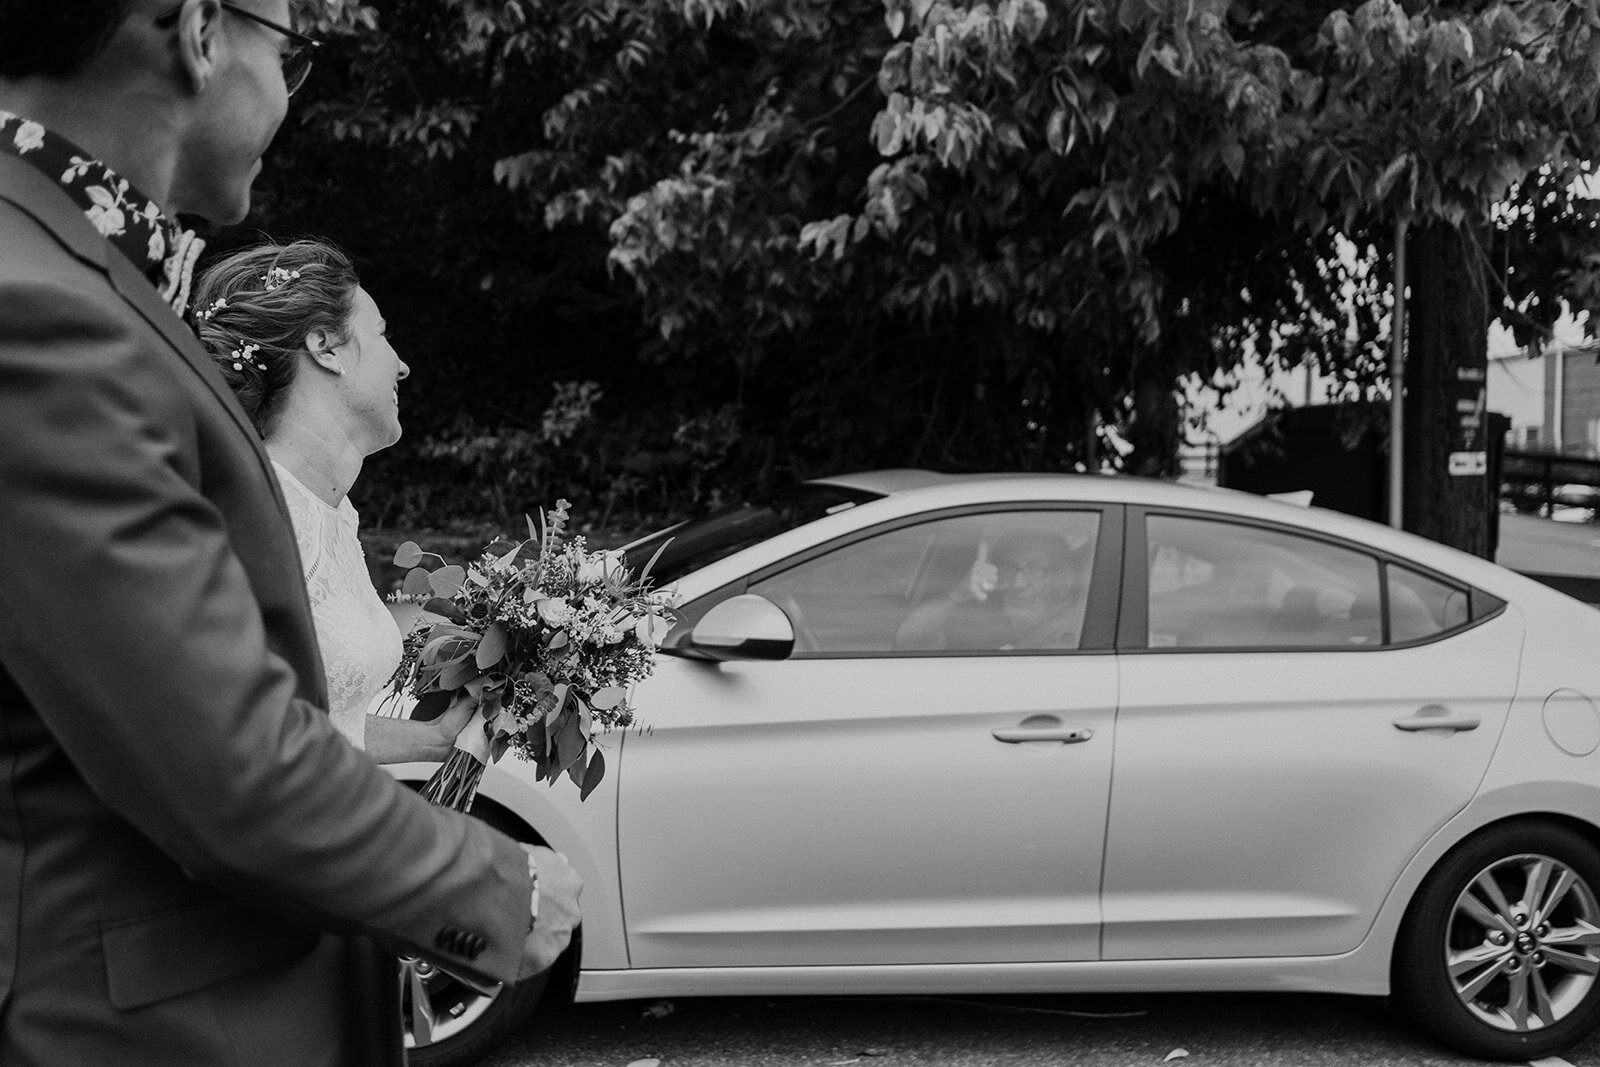 A man in a car gives a thumbs up to the bride and groom on their wedding day in Leesburg, VA.